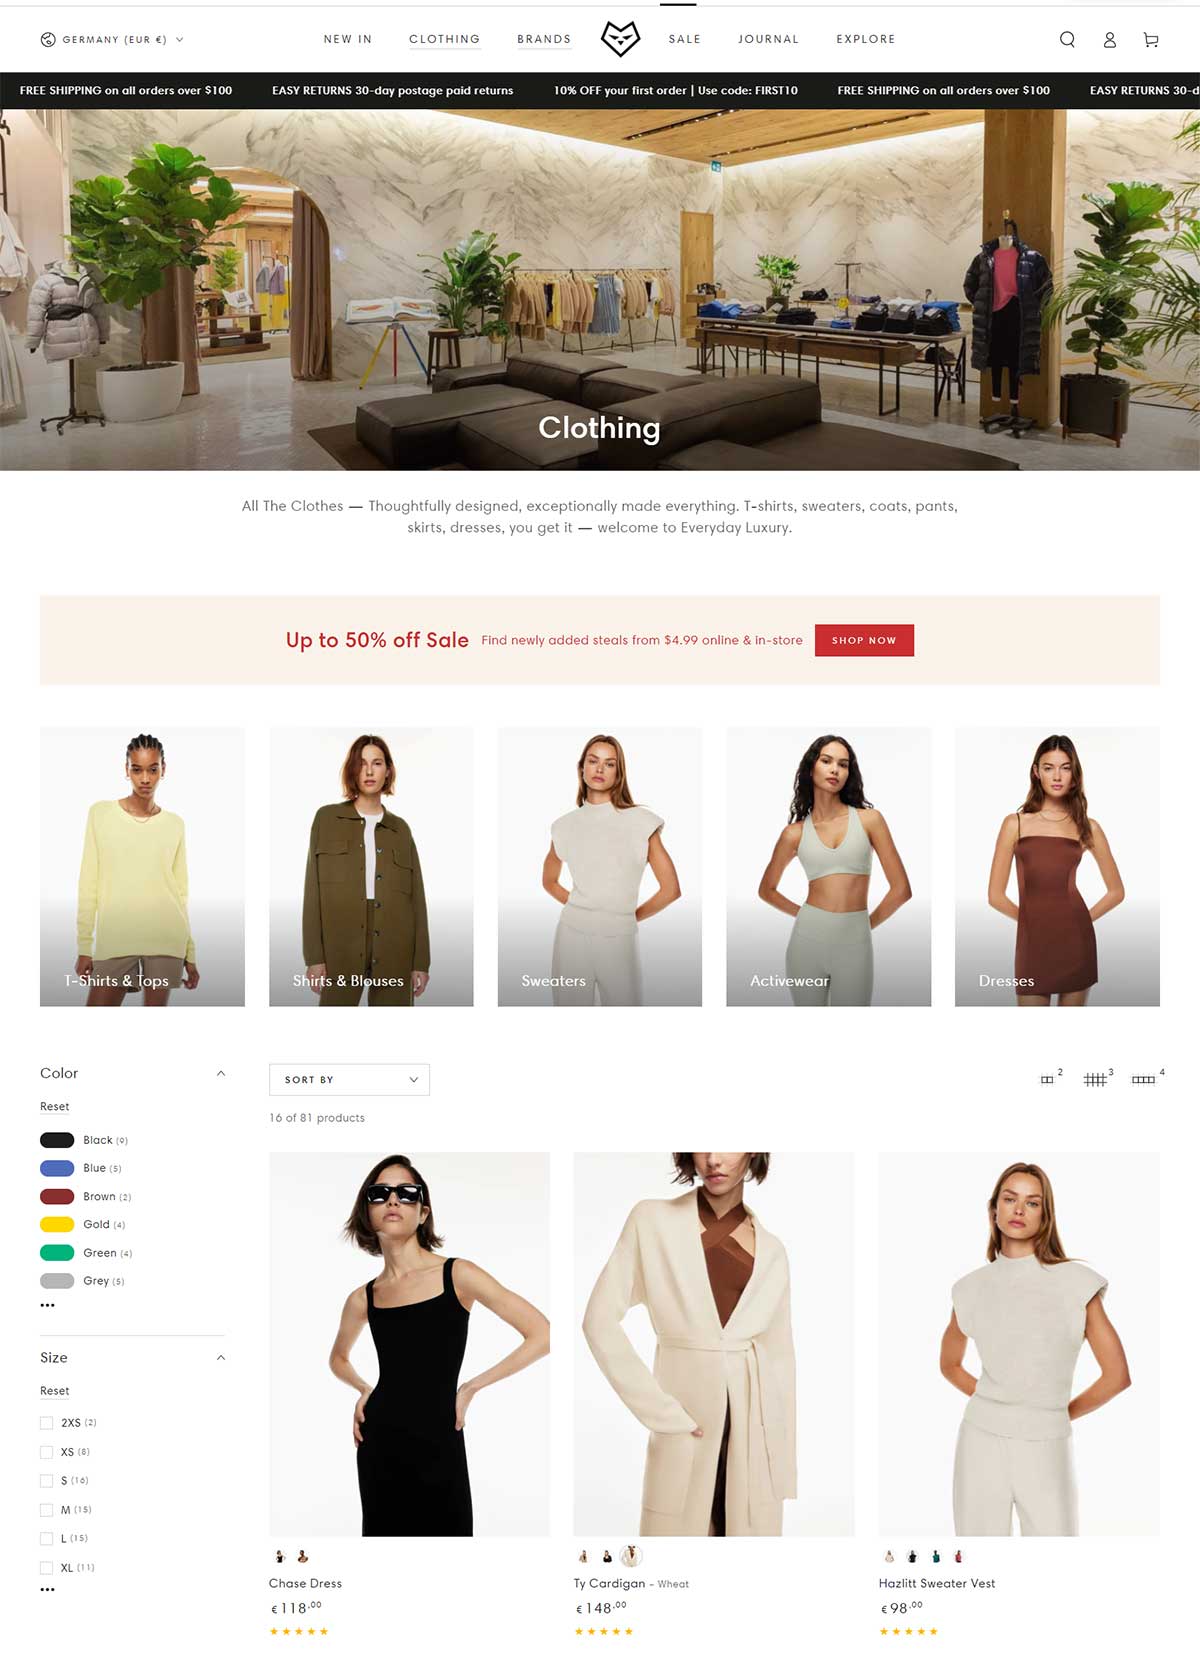 Be Yours Shopify Theme